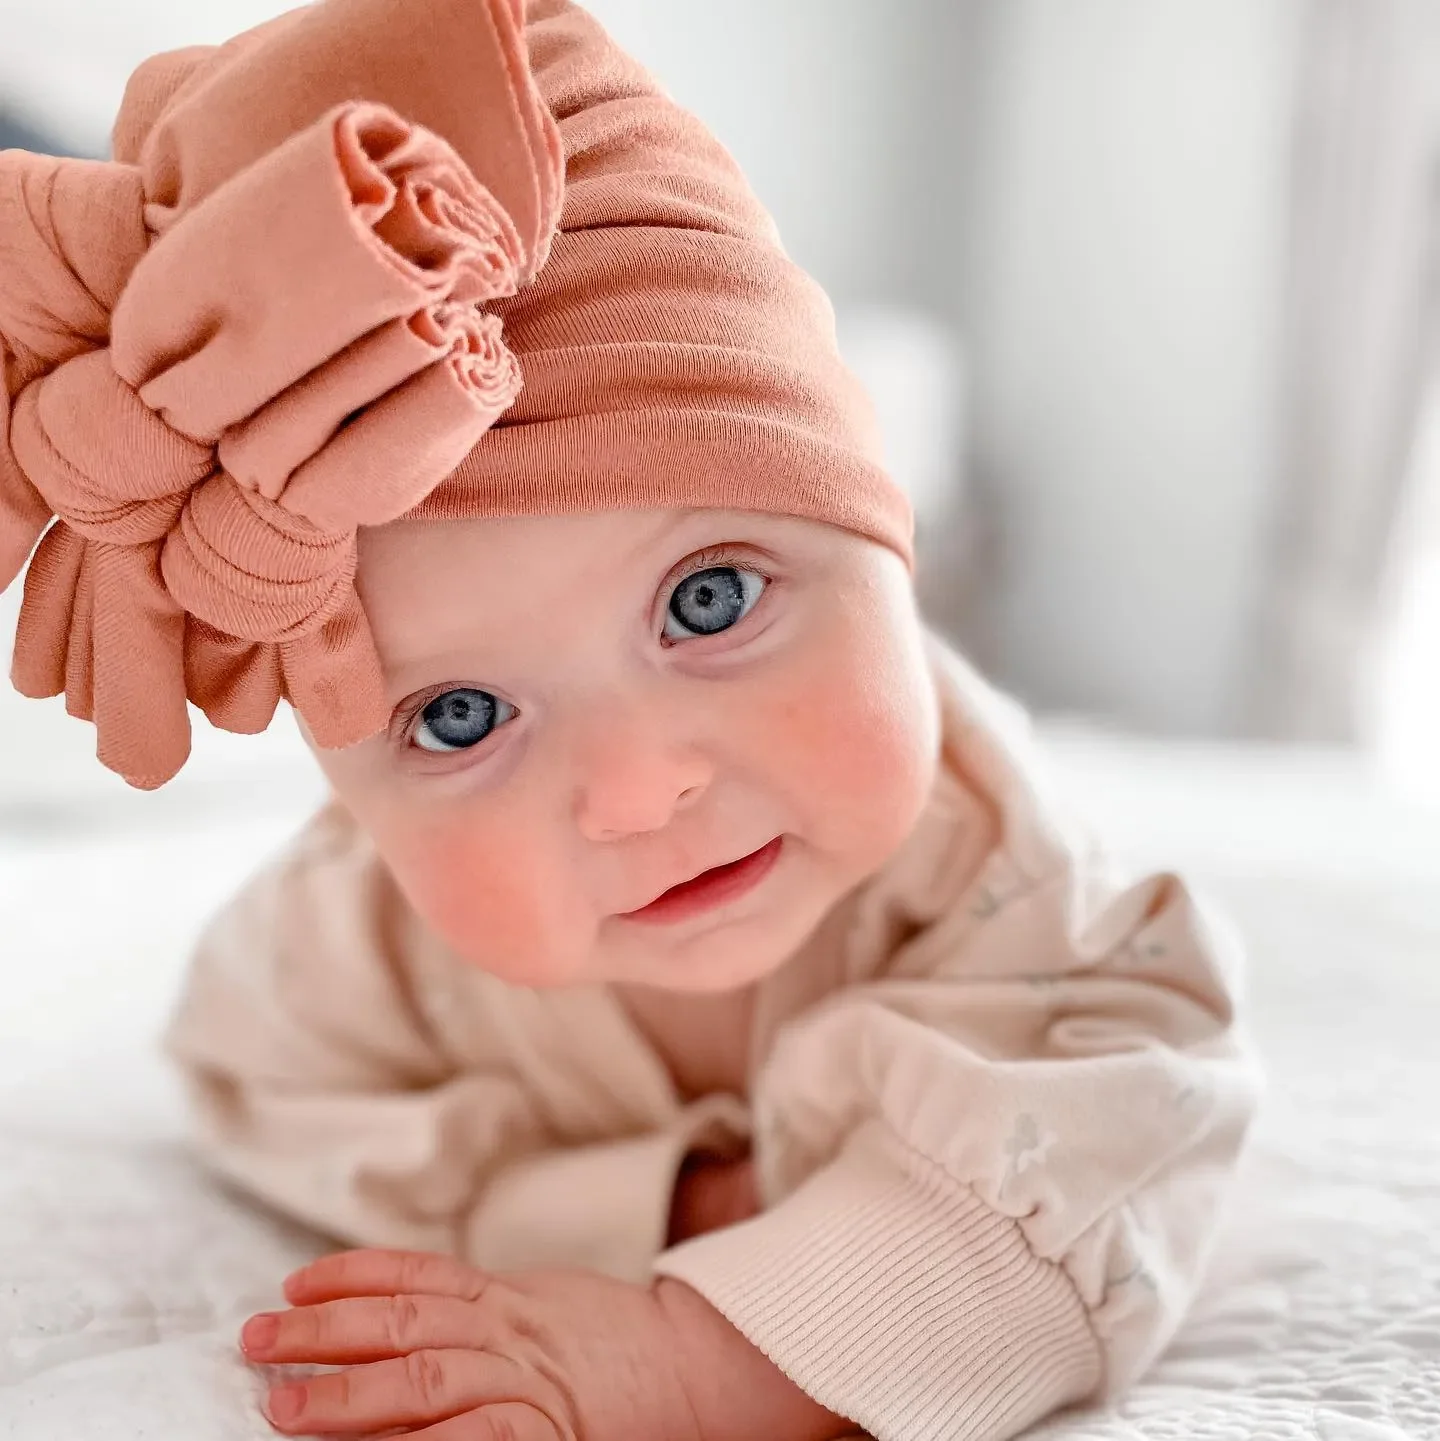 Solid Rayon Double Layers Baby Turban Hats Soft Flower Print Folded Triple Tie Knotted Caps Newborn Beanies Bonnet Headwraps